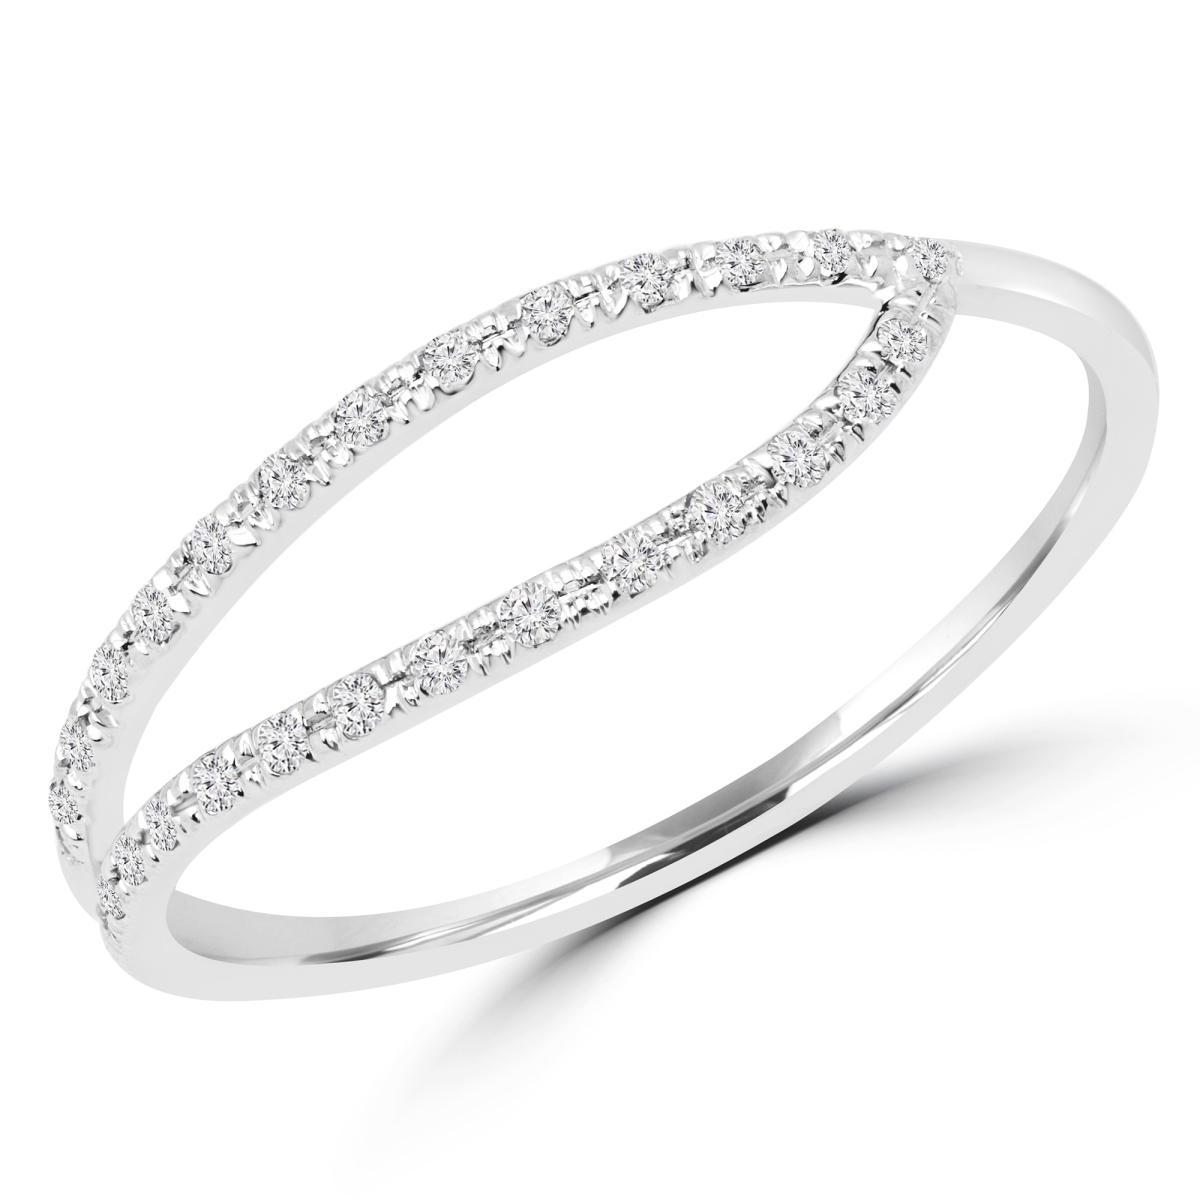 Picture of Majesty Diamonds MDR170056-P 0.1 CTW Round Diamond Cocktail Ring in 14K White Gold